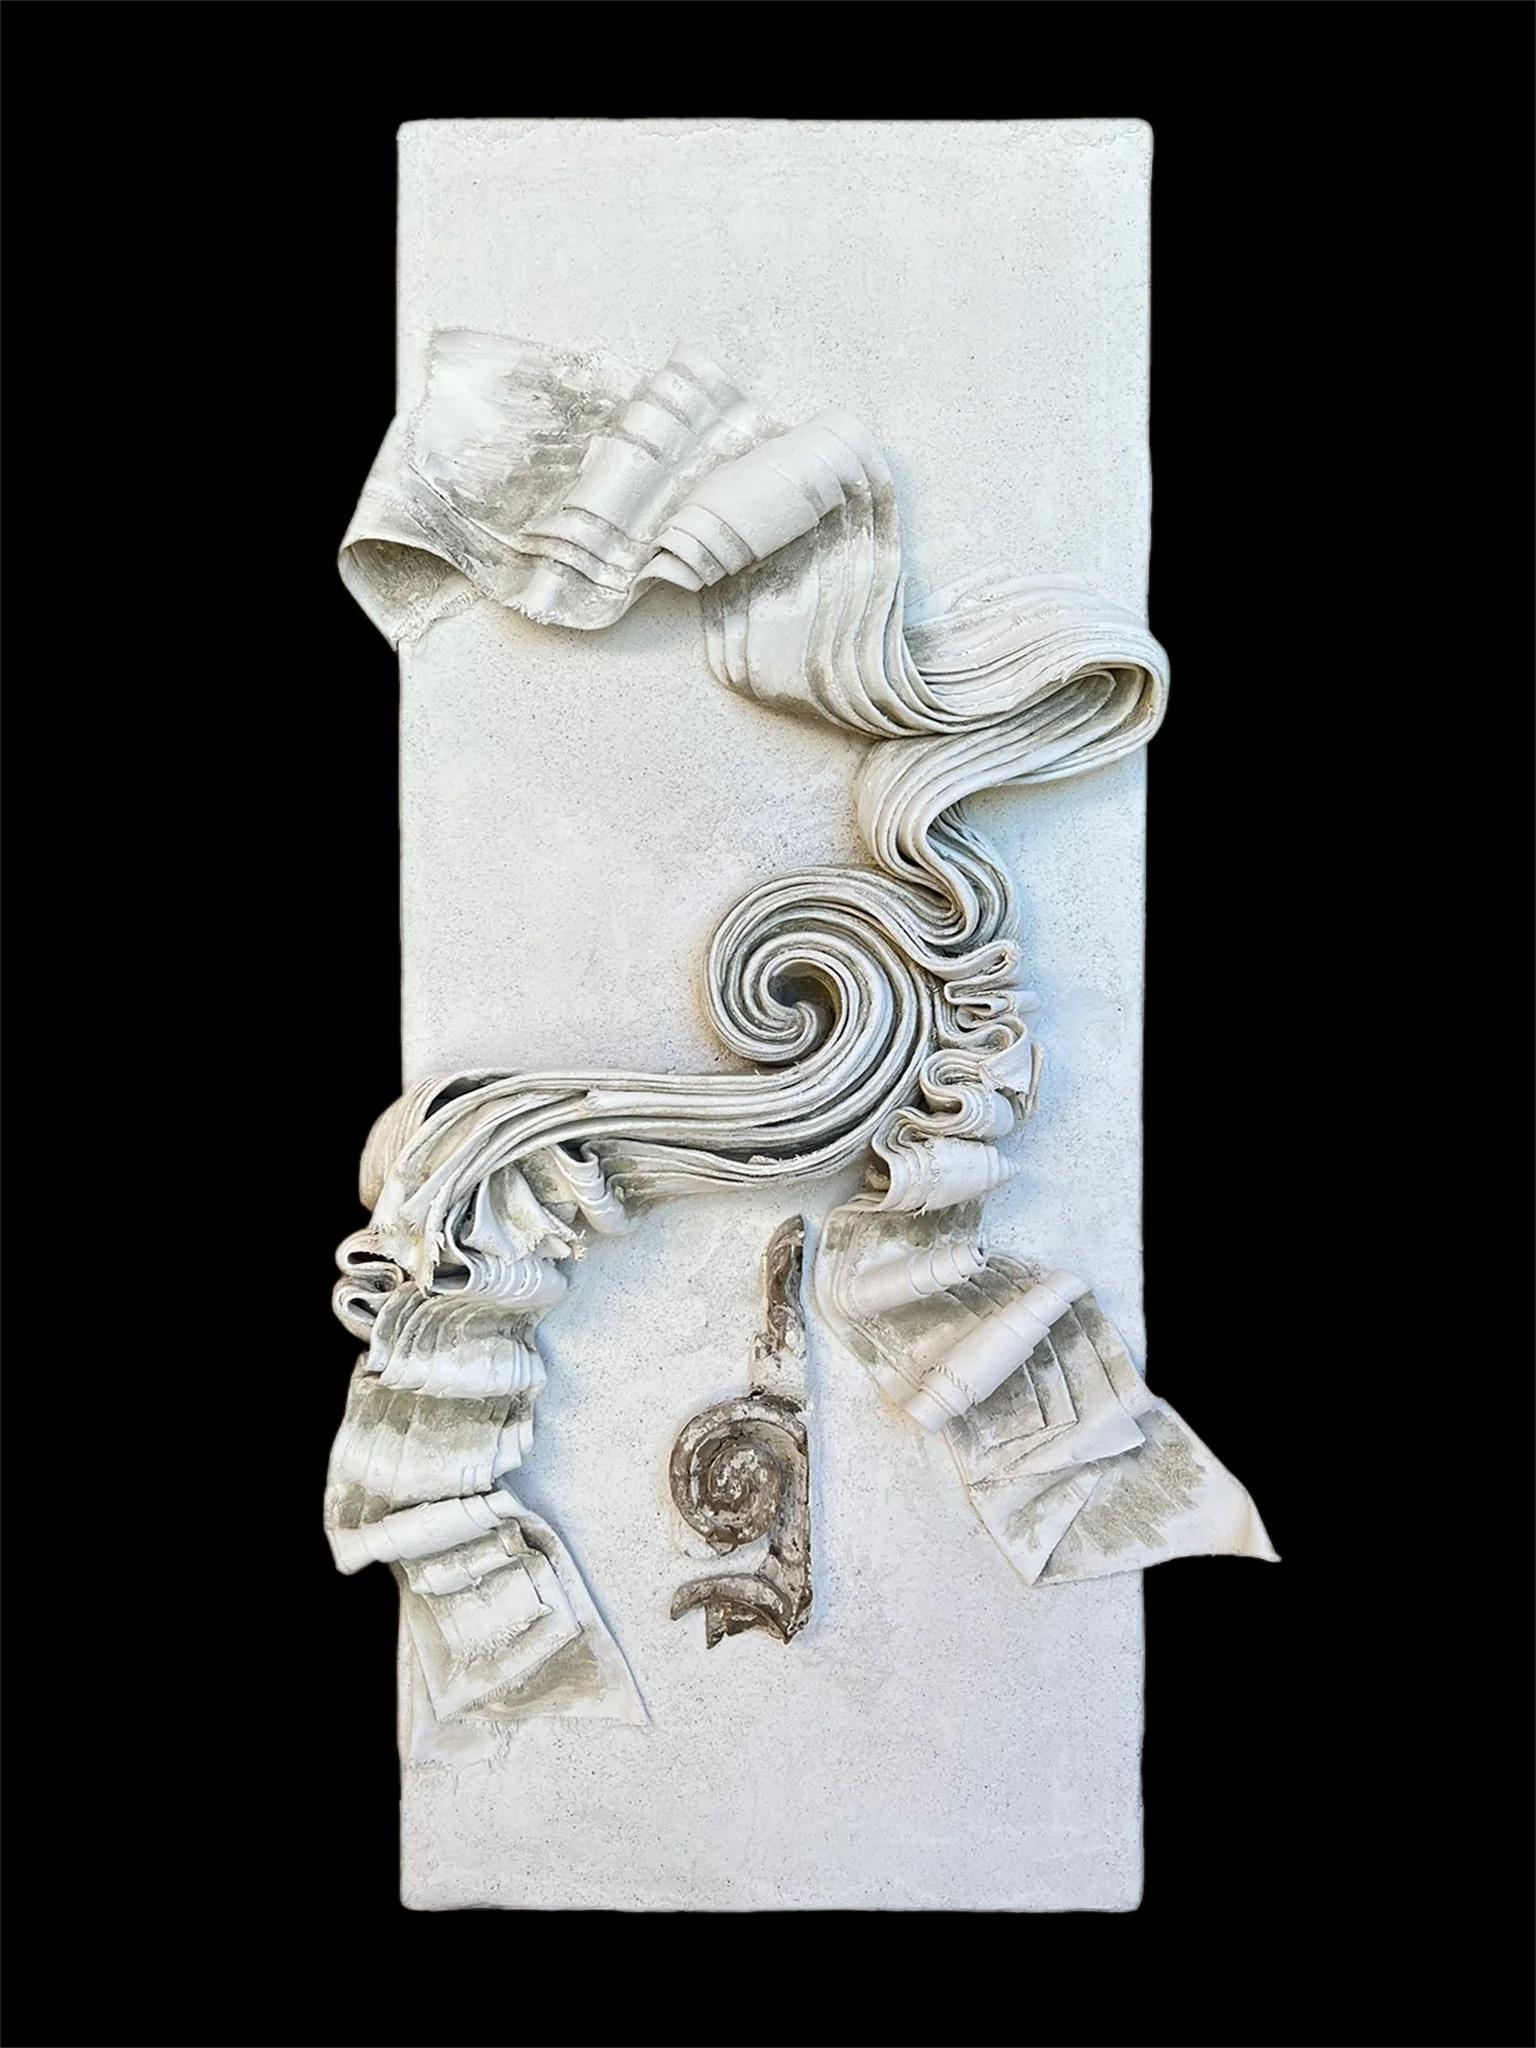 Sculptural canvas relief with a 17th century Italian Florence fragment by Elena Rousseau.

The sculpted canvas is molded together with fresco plaster, gesso, ash, green earth, and 24k shell gold on board. The original 17th century Italian Florence